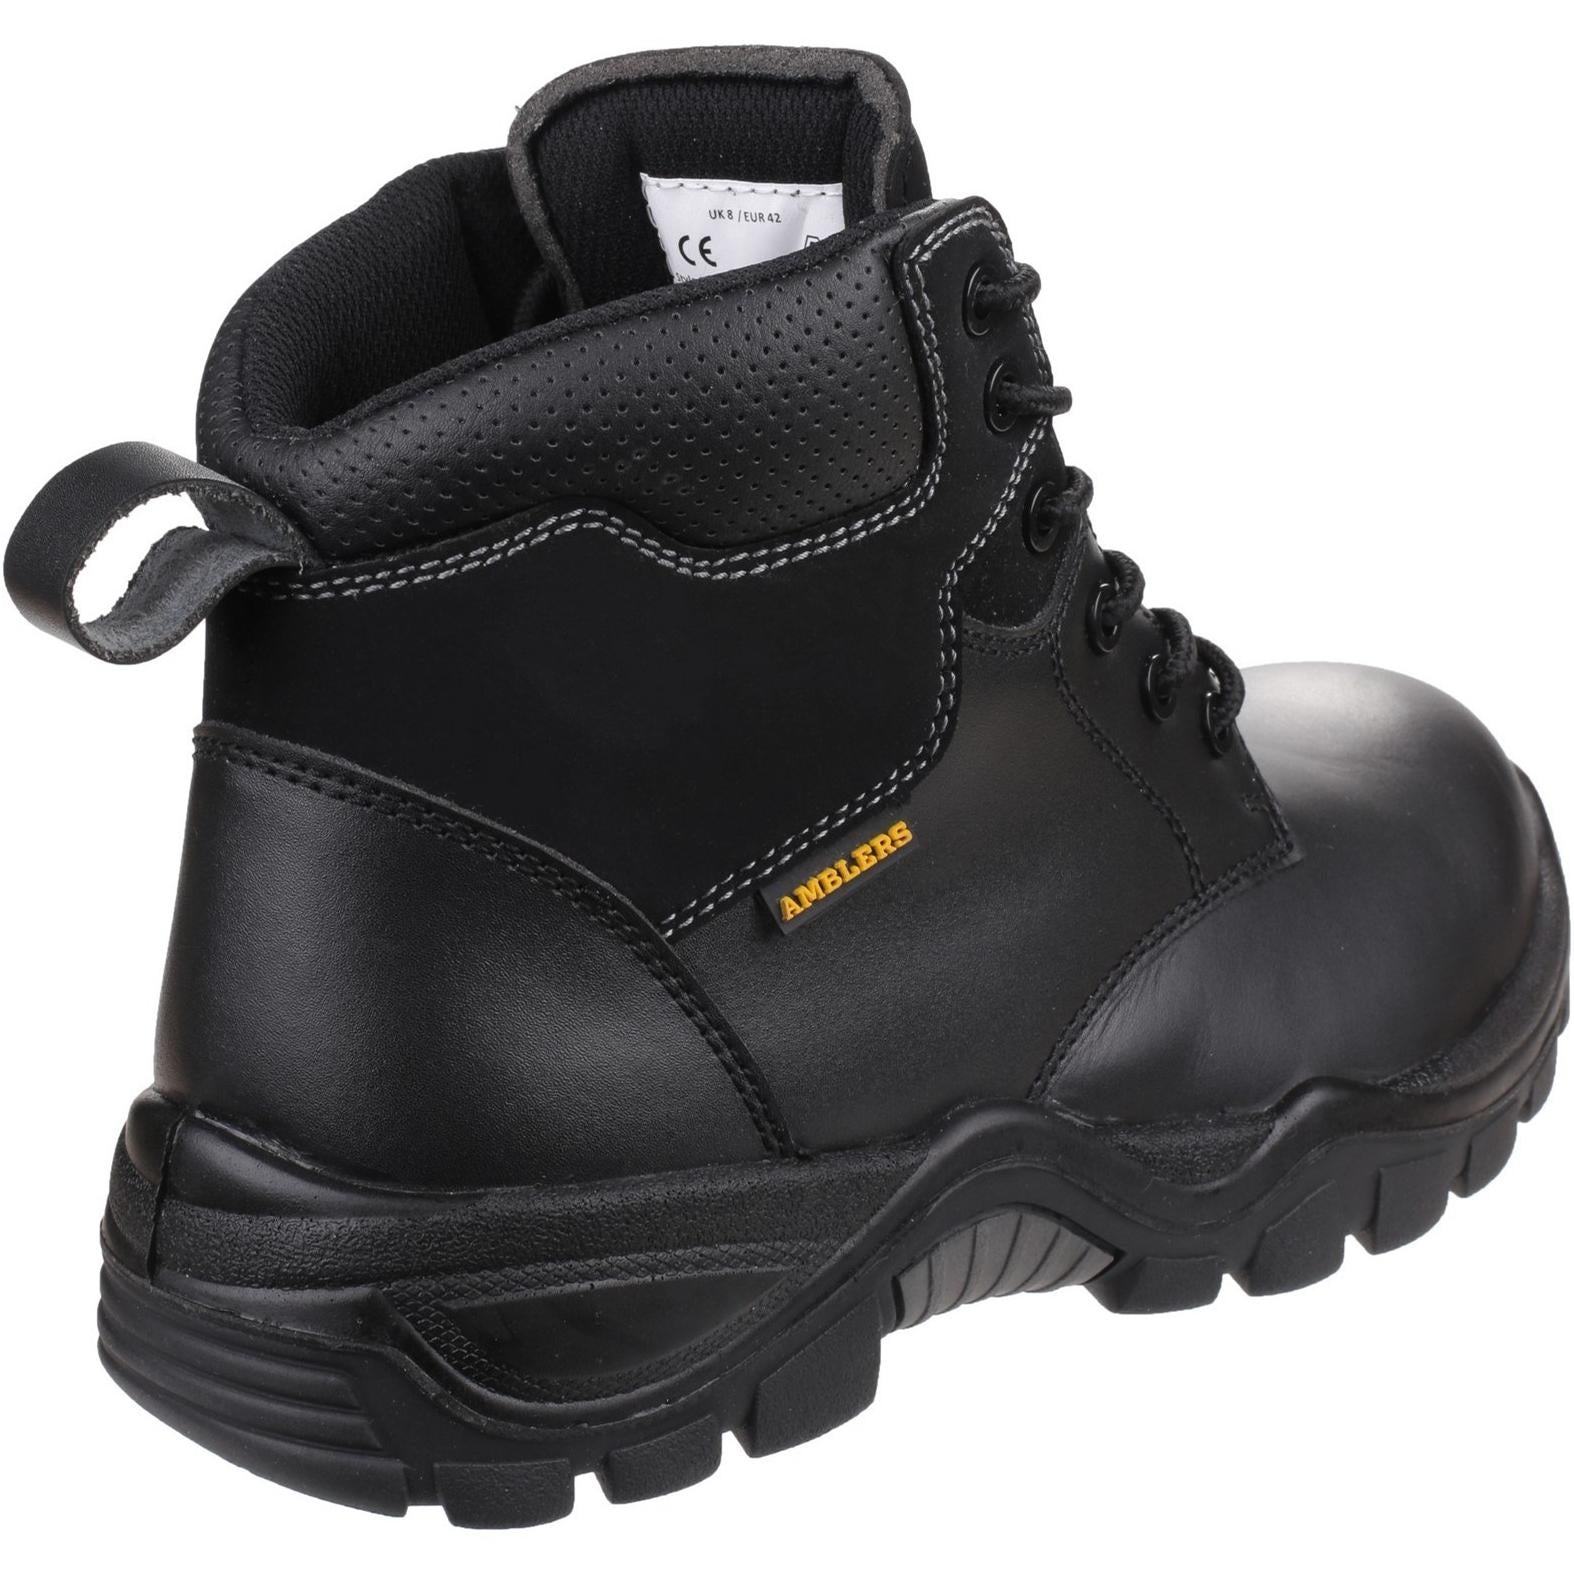 Amblers Safety AS302C Preseli Non-Metal Lace up Safety Boot